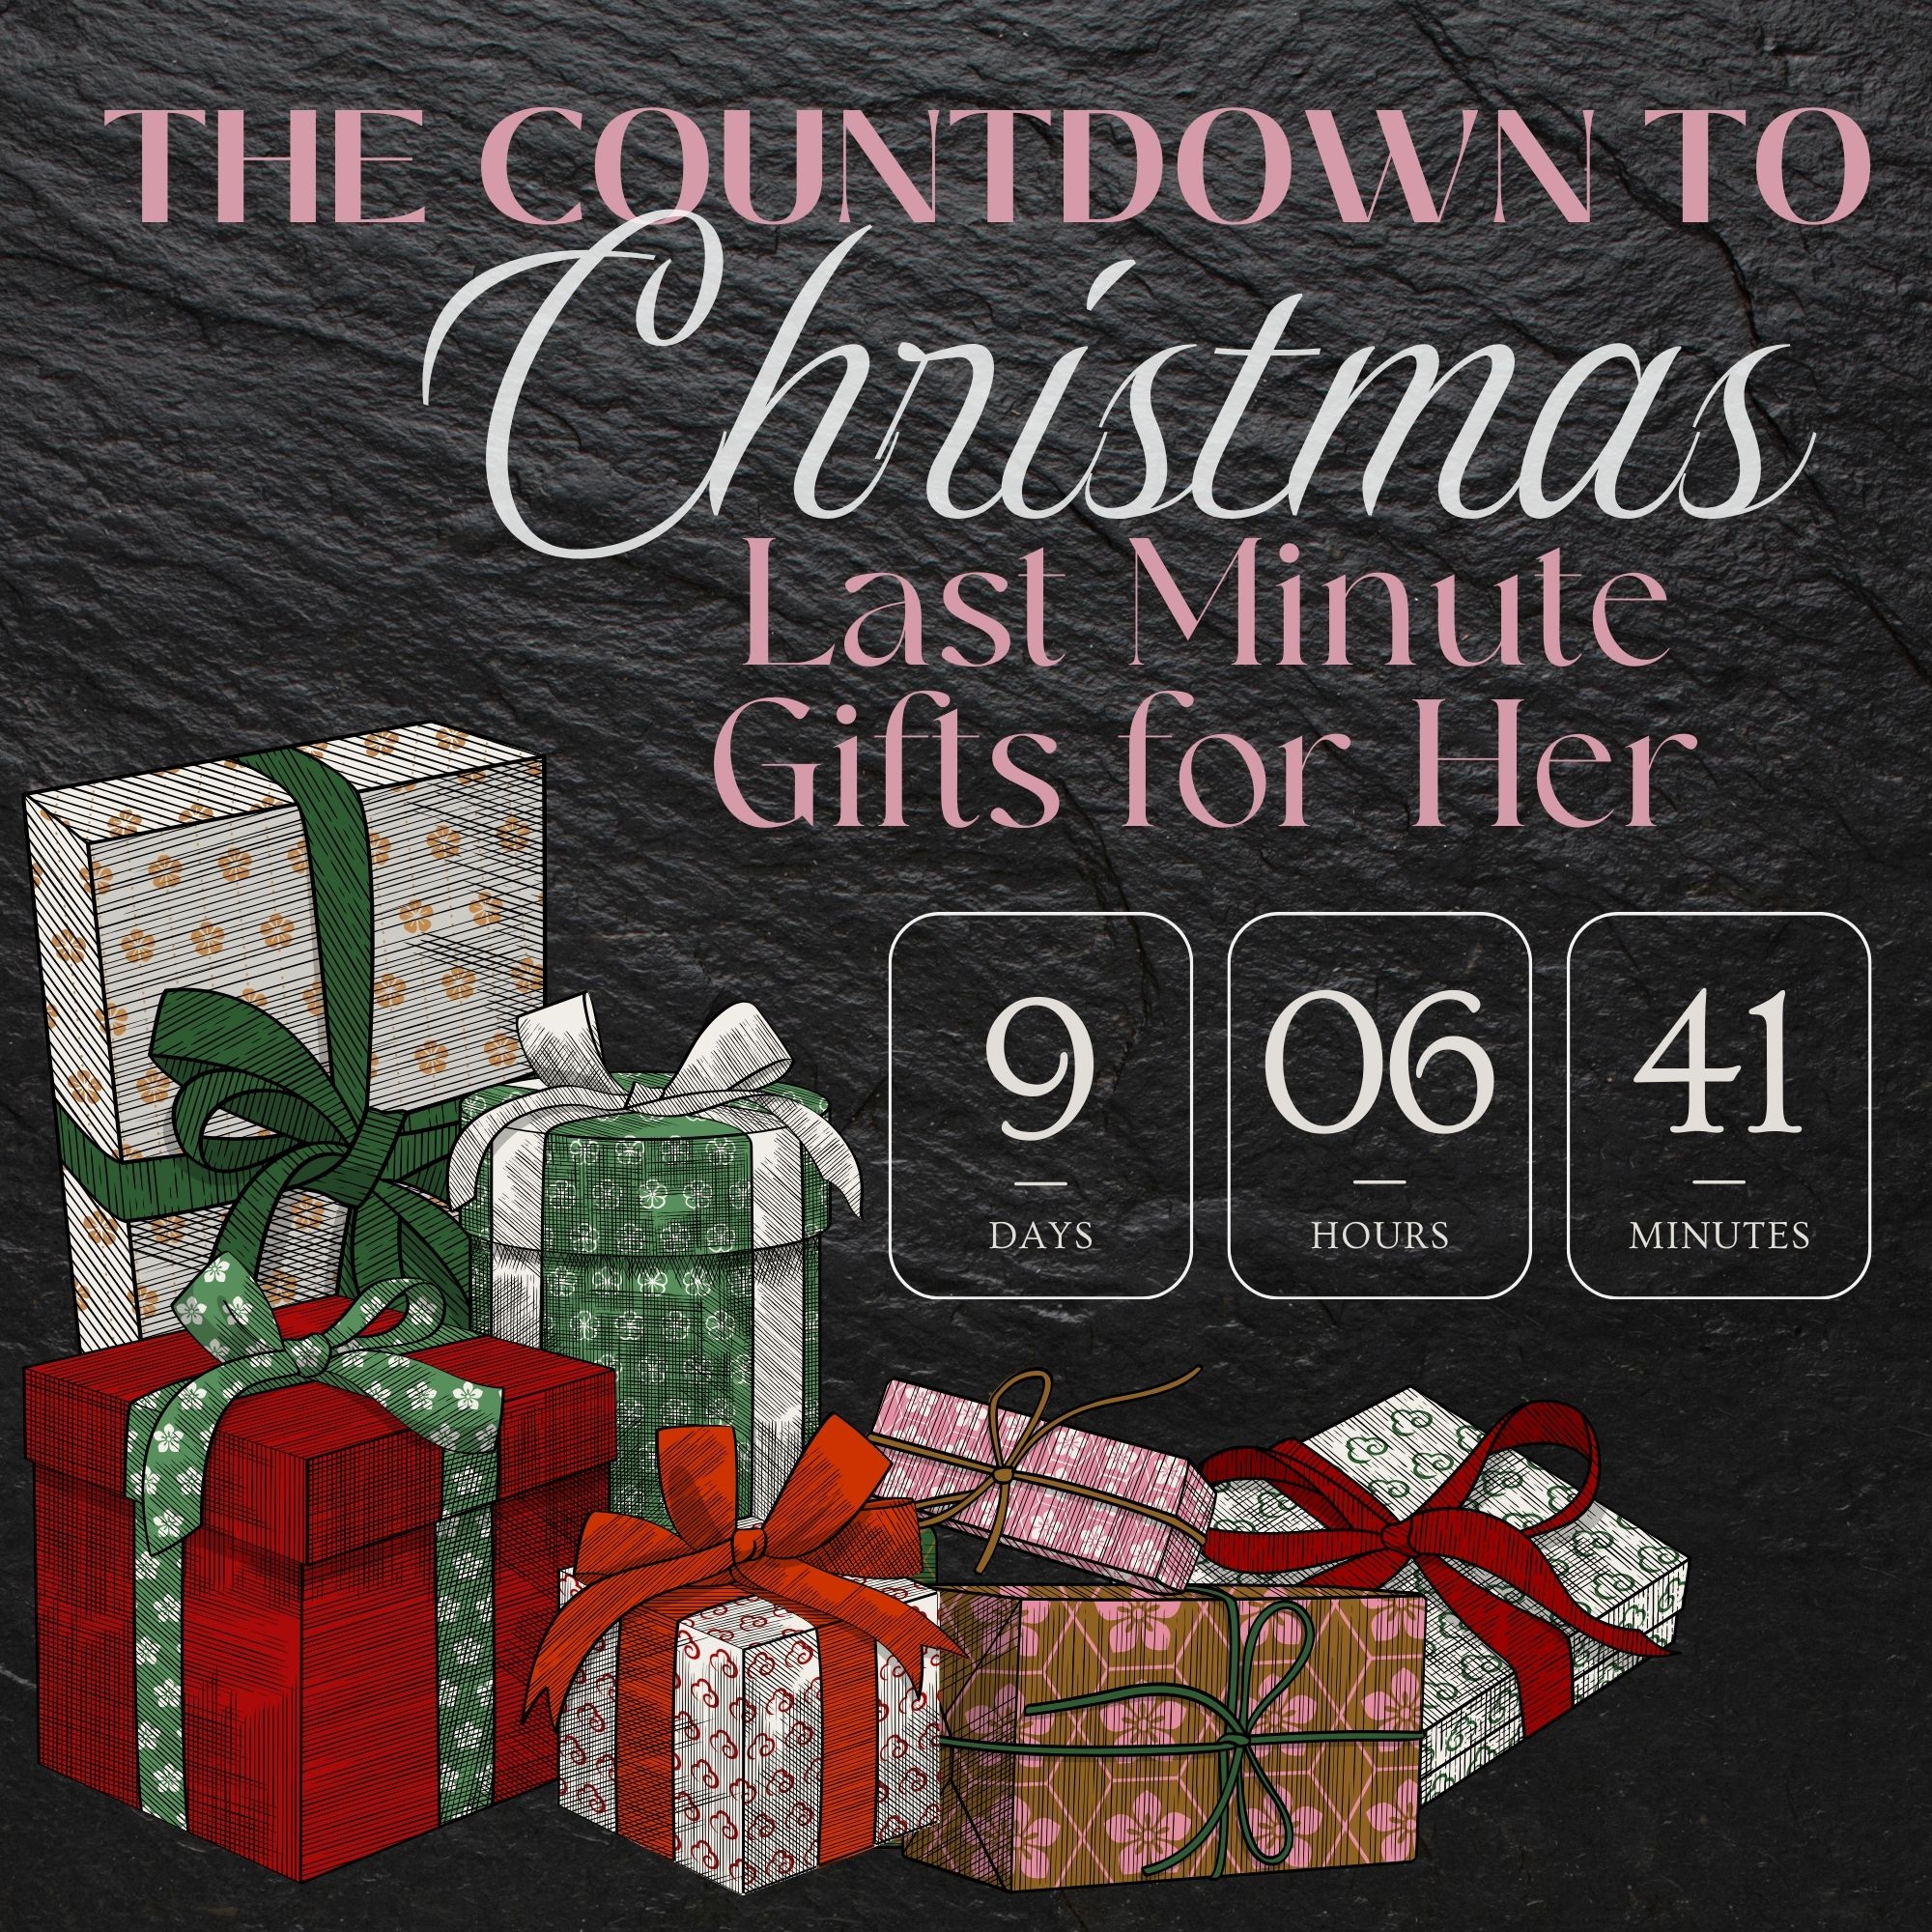 Countdown to Christmas…Last Minute Gifts for Her